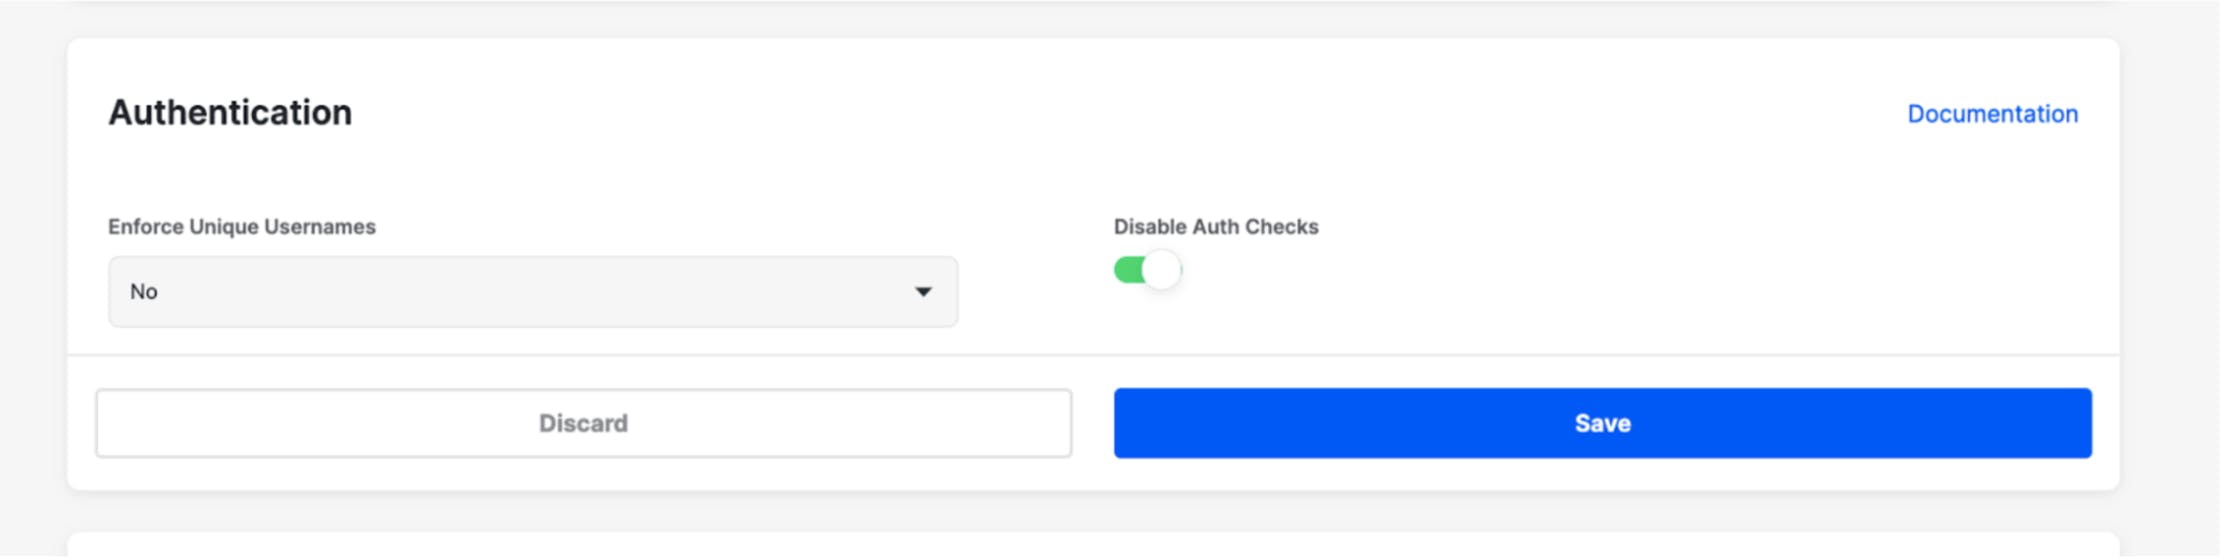 Authentication Section Stream Dashboard